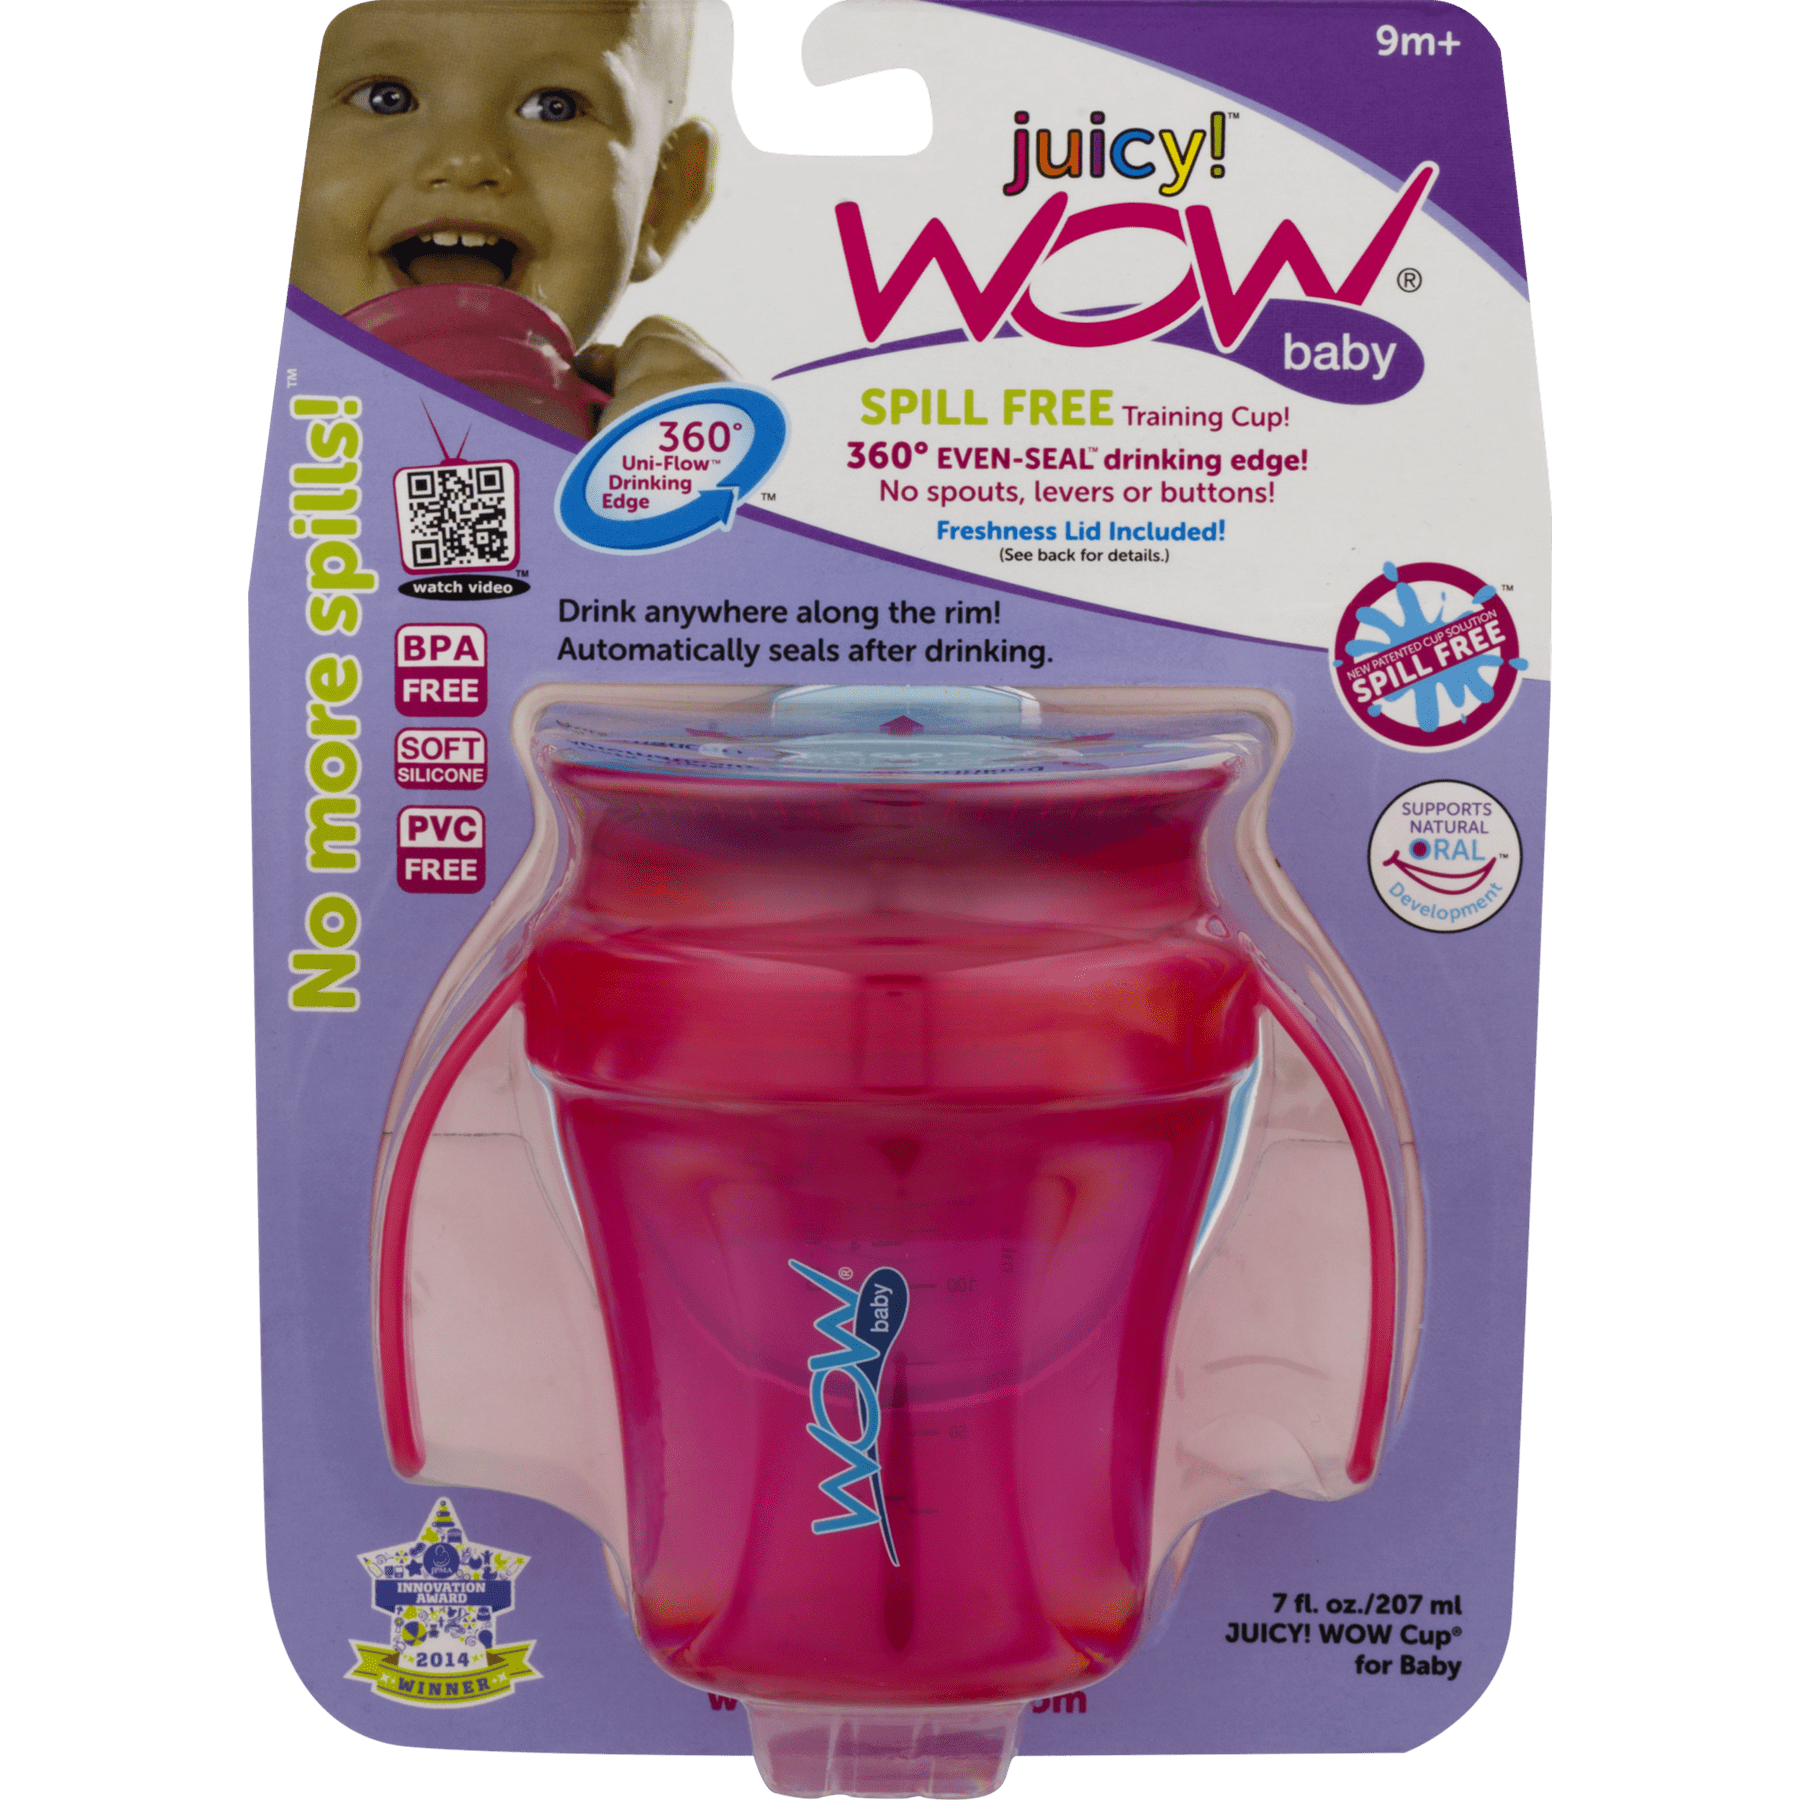 As Seen on TV Wow Cup, Spill-Proof Cup 4 pack 2 Pink Algeria